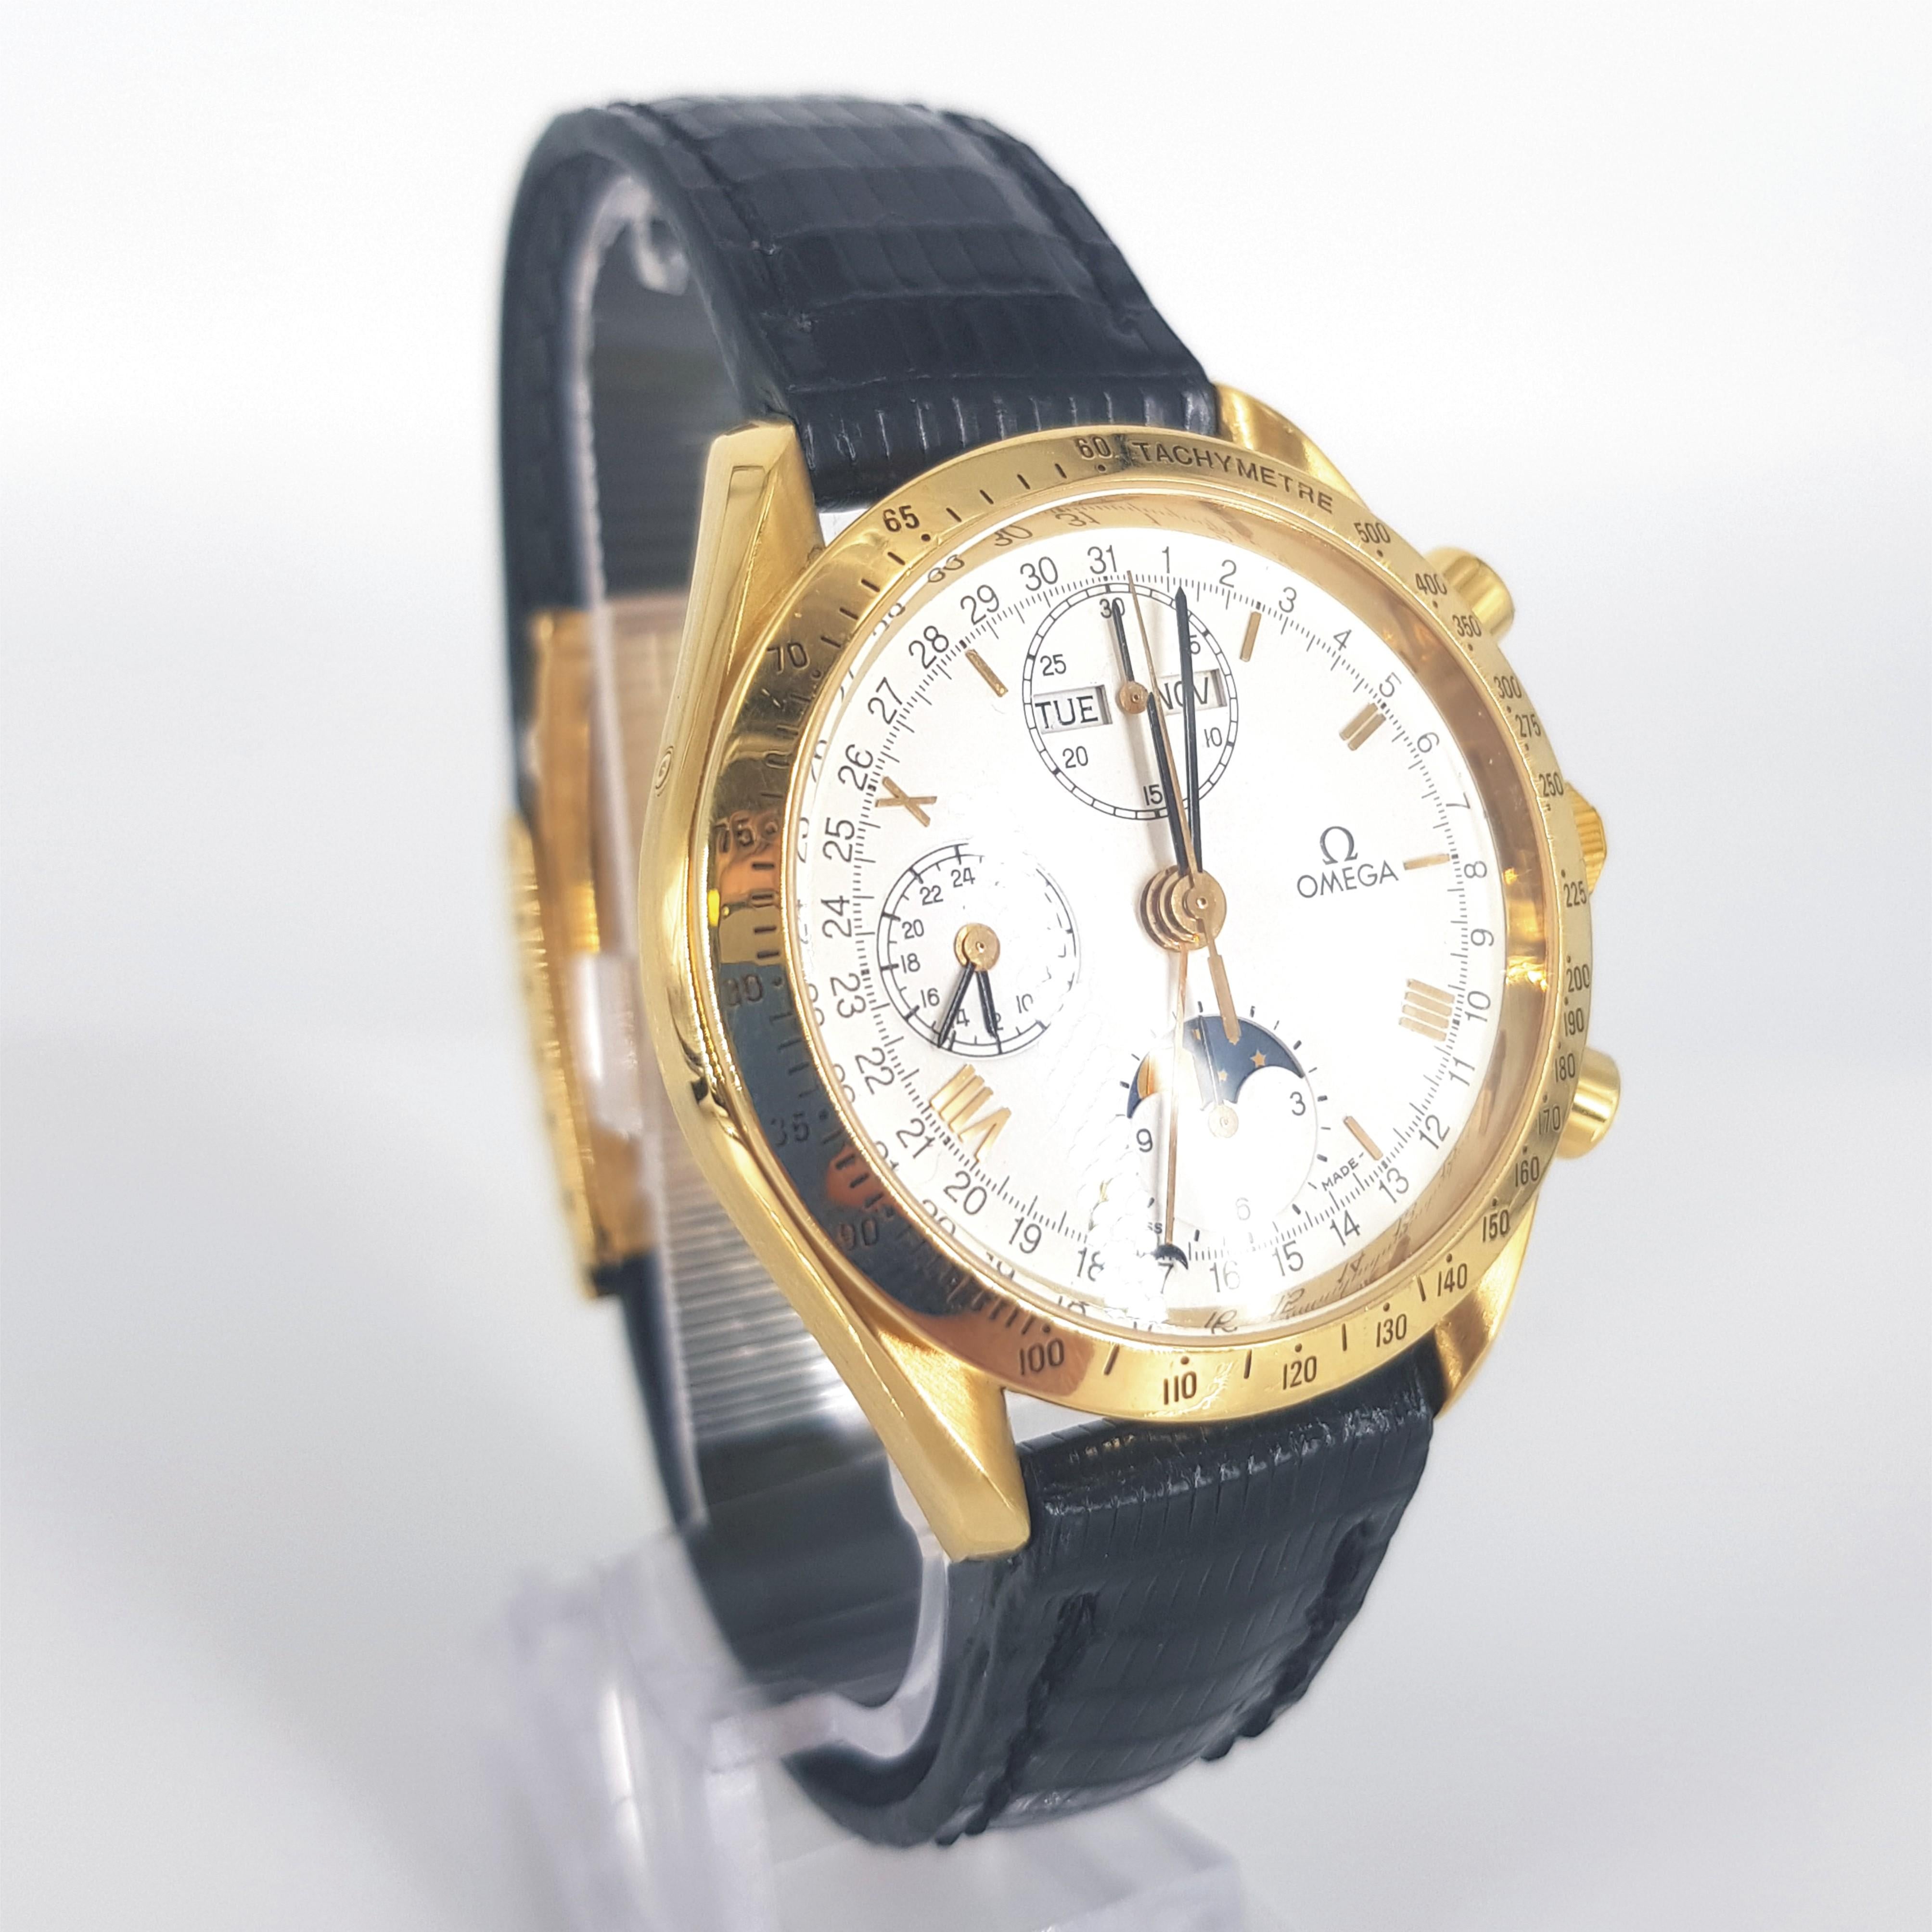 GENDER:  Male

MOVEMENT: Automatic

CASE MATERIAL: 18ct Gold

DIAL:    38mm

STRAP: 56mm

BRACELET MATERIAL: Leather

DIAL TYPE: White

CONDITION: 9/10

BOX – No

PAPERS – No